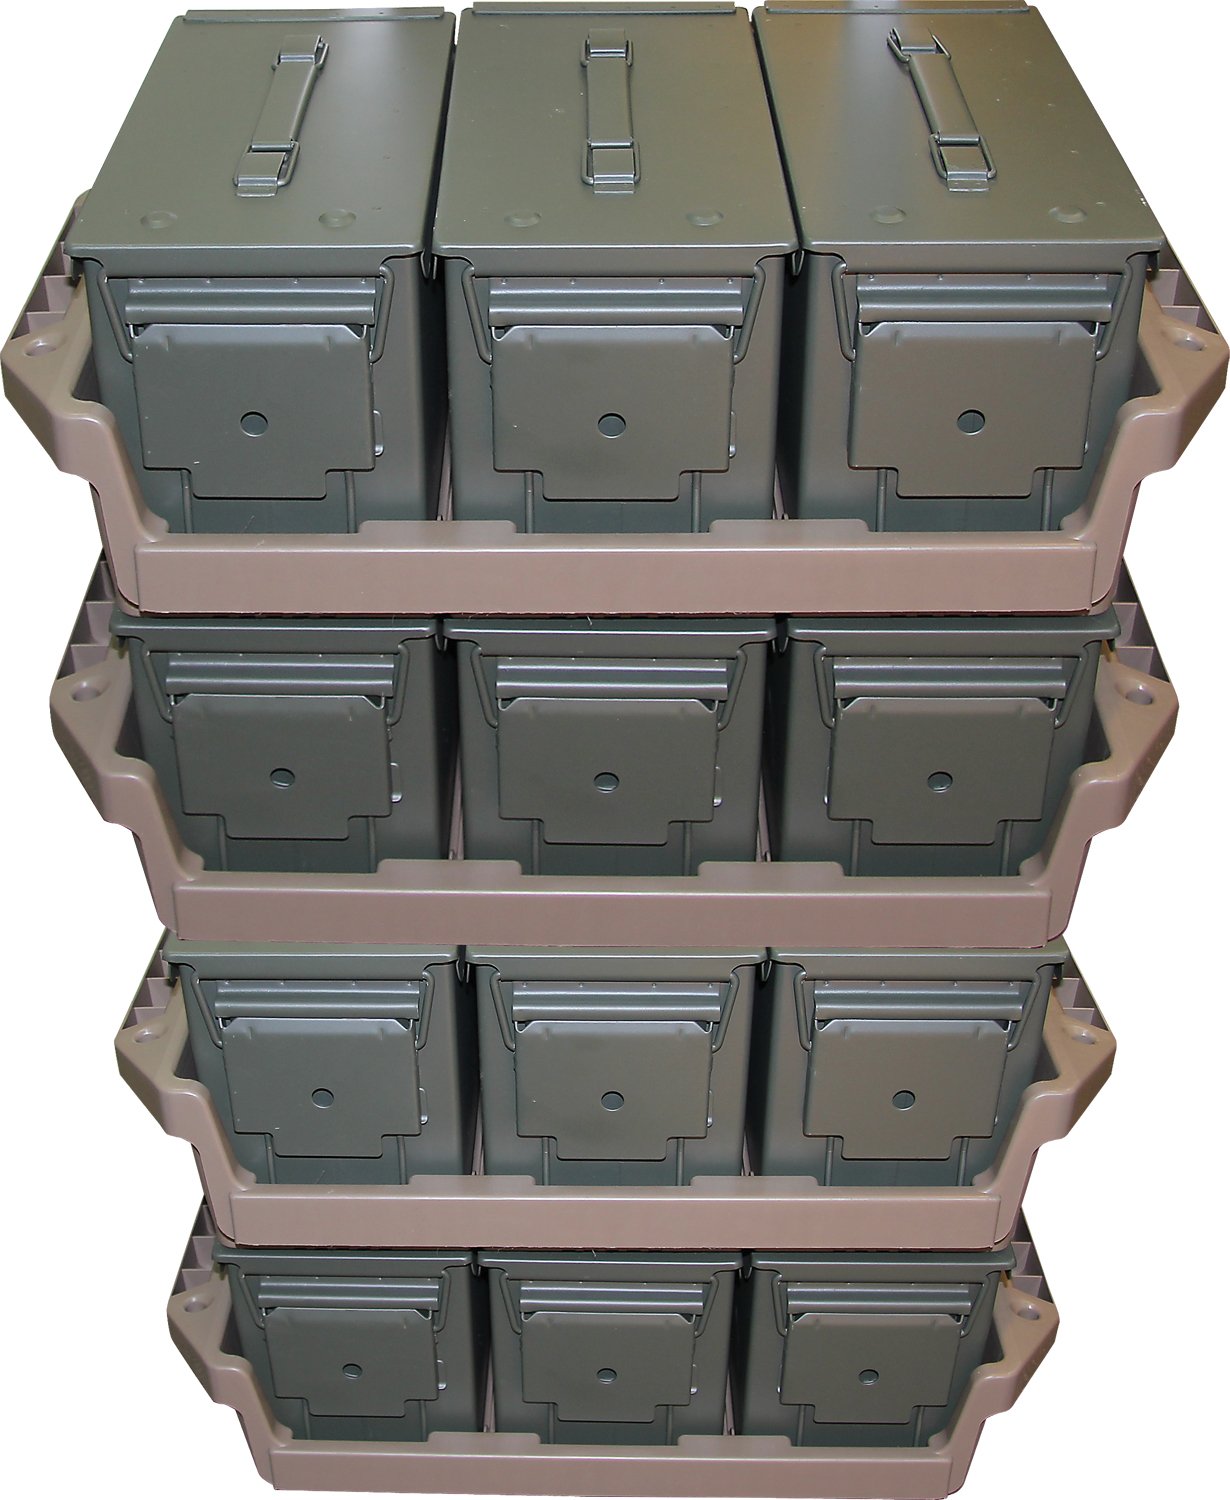 MTM® CASE-GARD™ Creates Transportation Tray for Millions of Ammo Cans